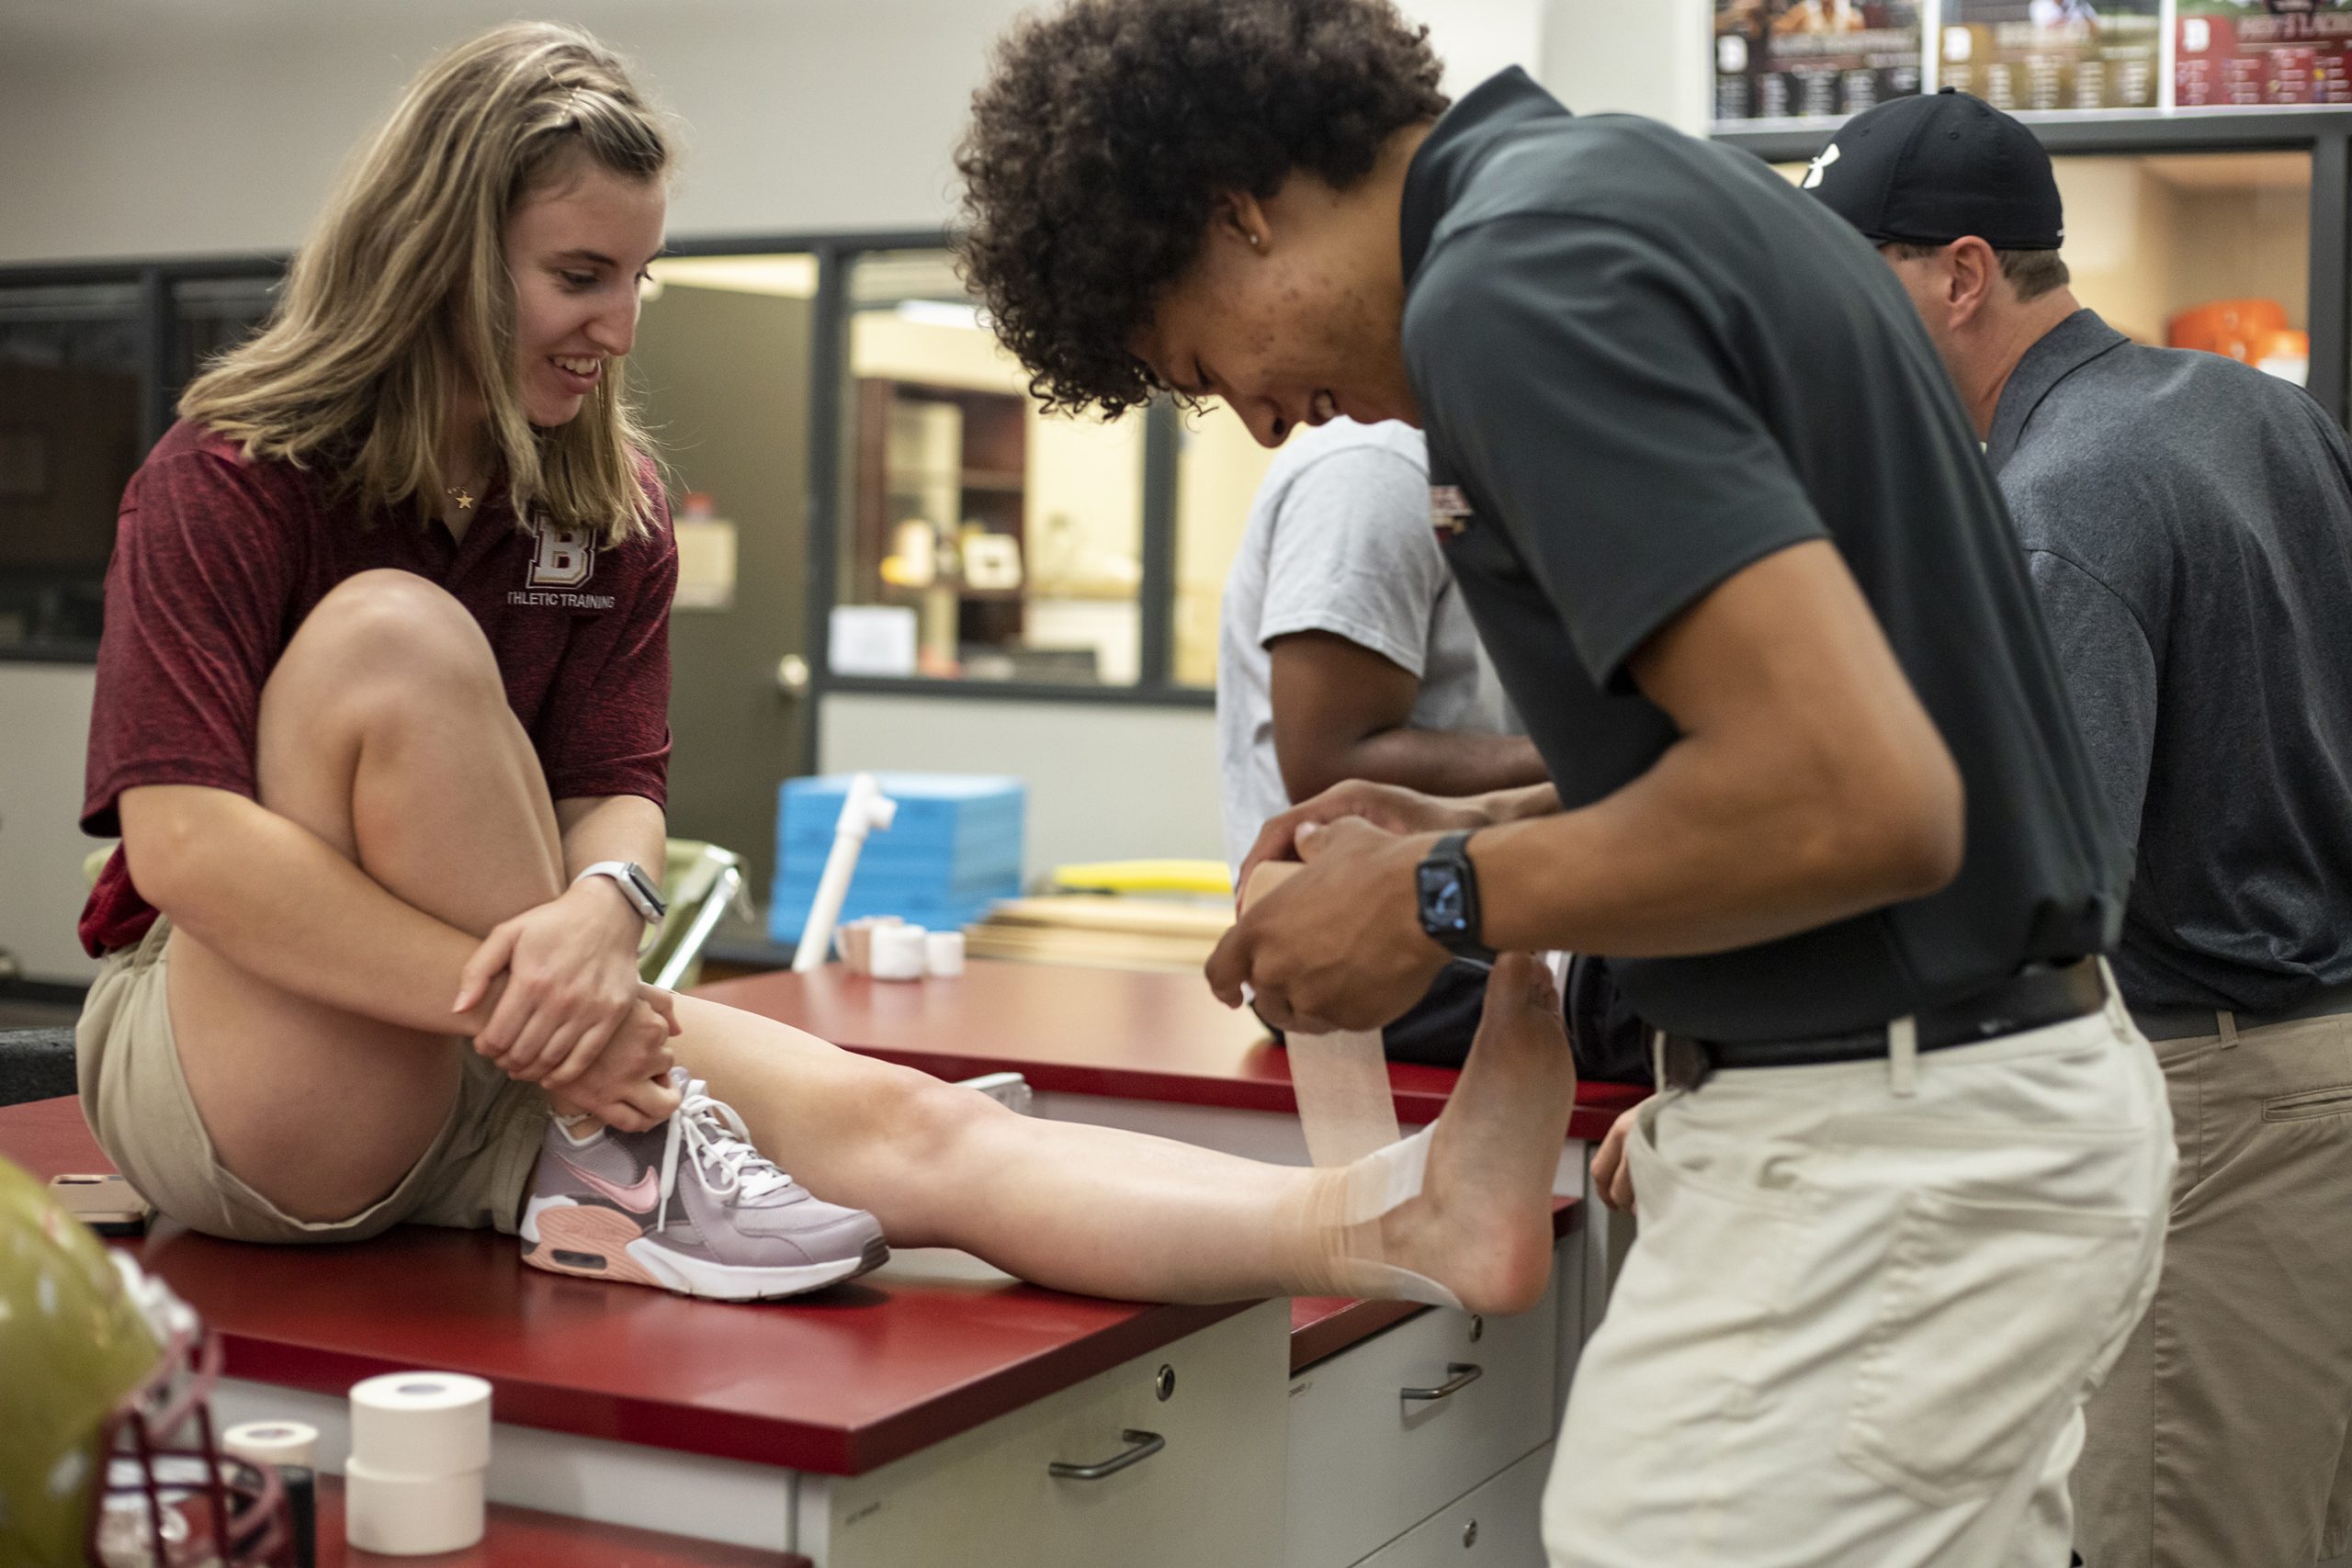 Athletic training student practicing taping ankle